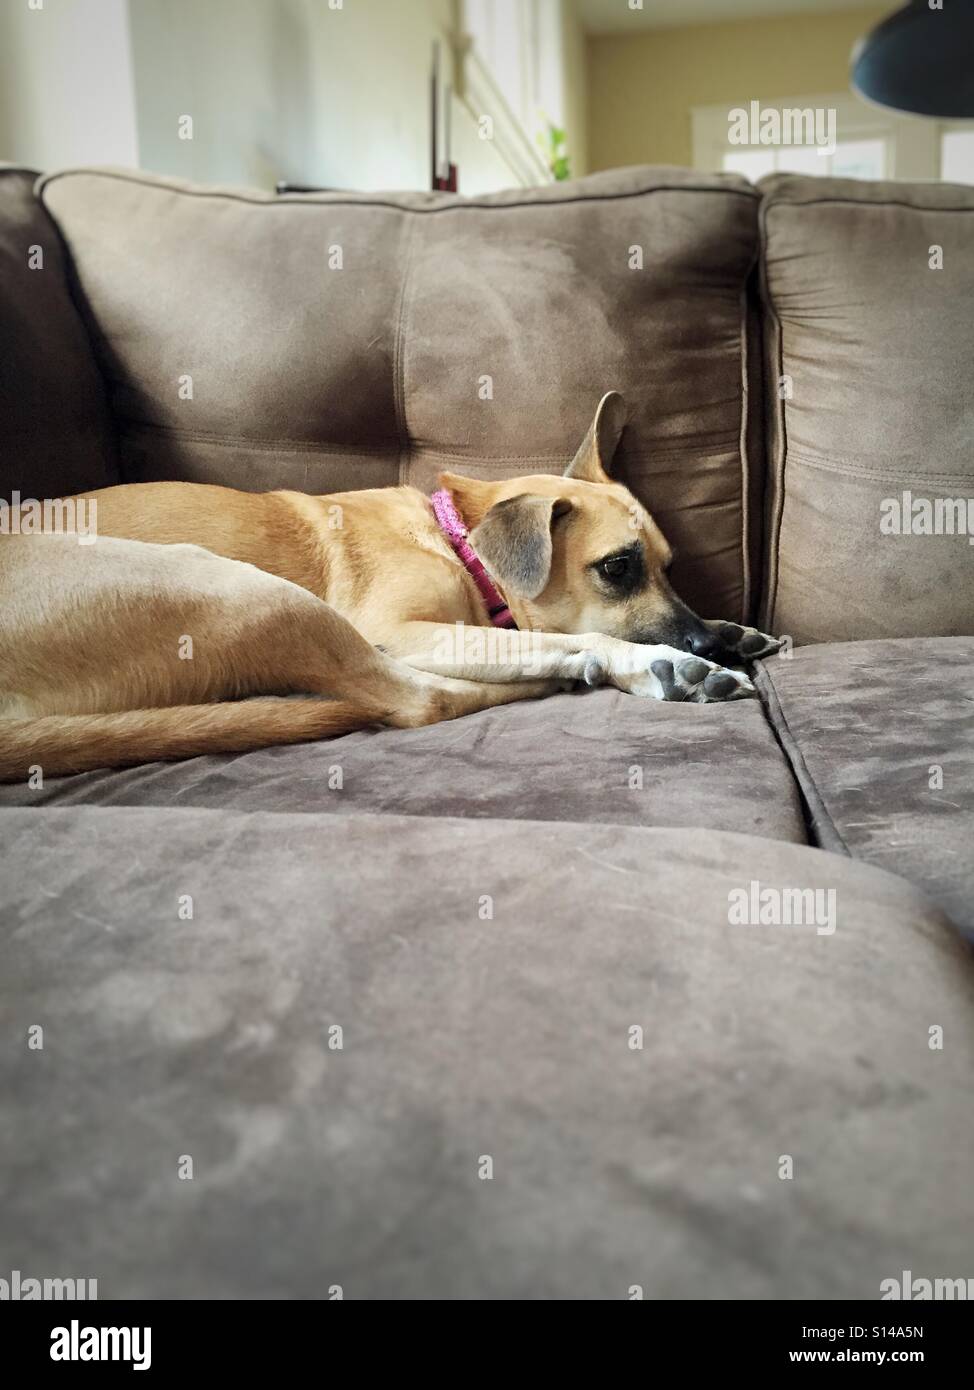 Dog resting on couch Stock Photo